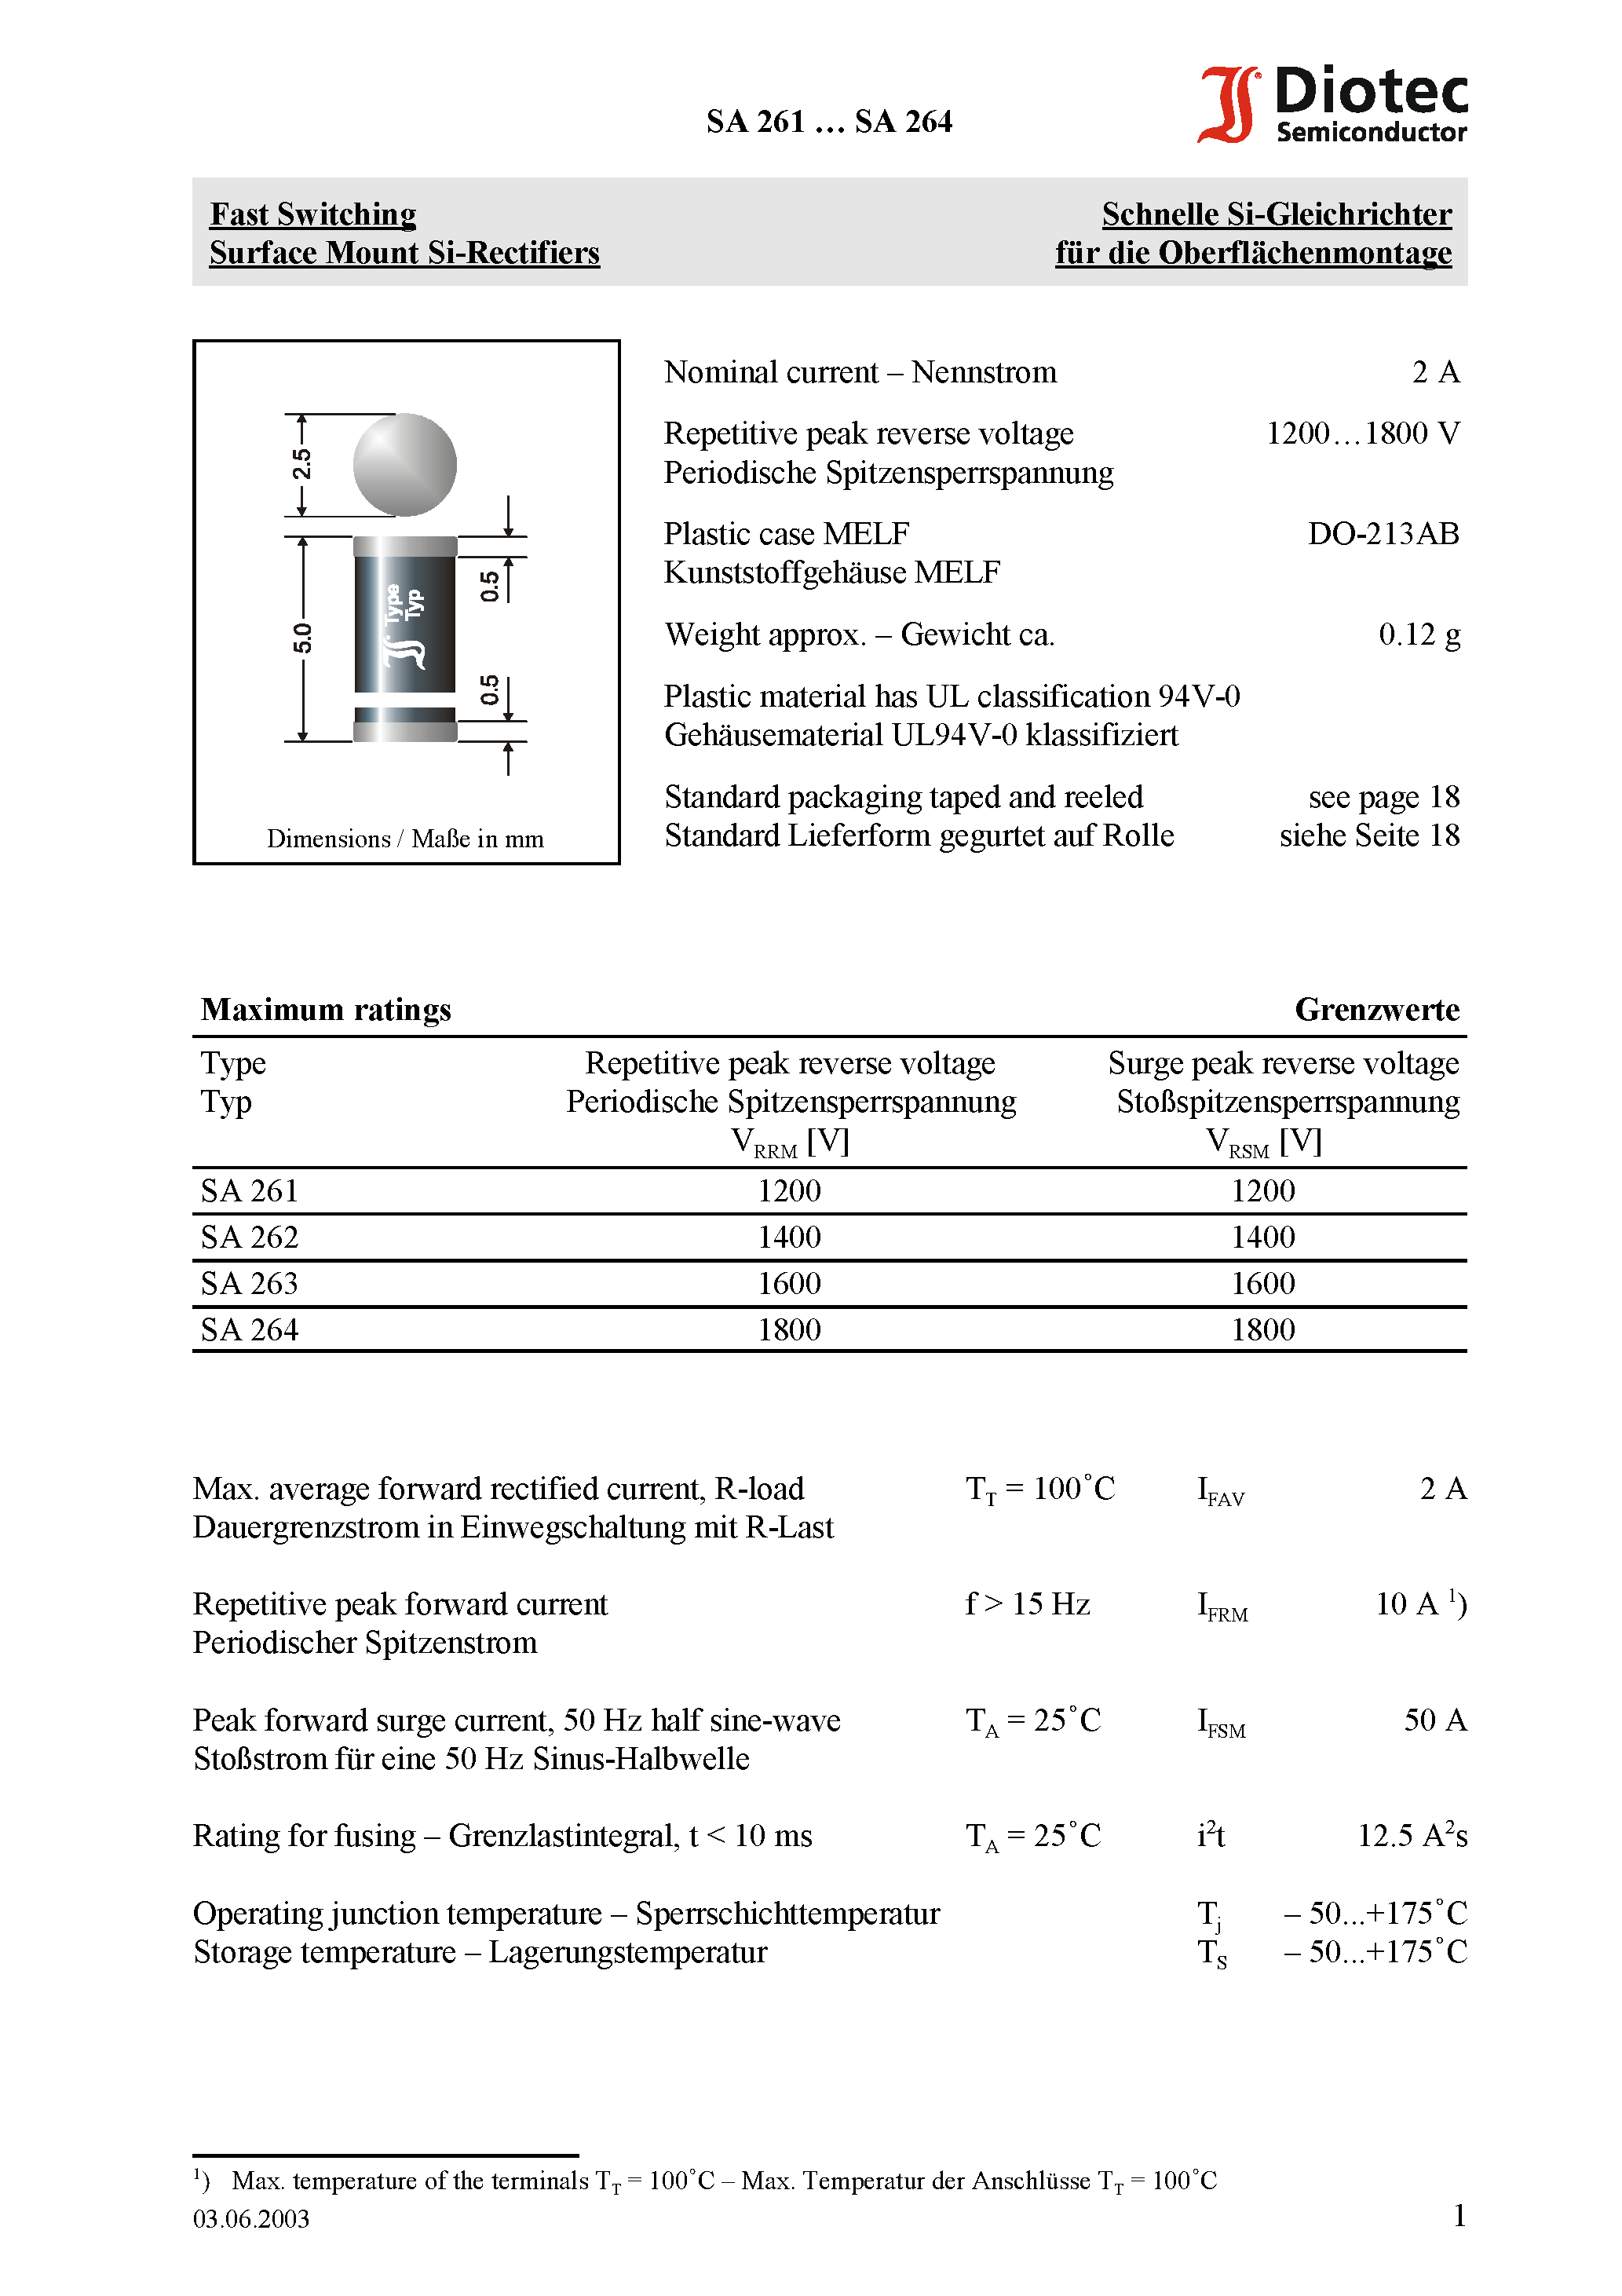 Datasheet SA263 - Fast Switching Surface Mount Si-Rectifiers page 1